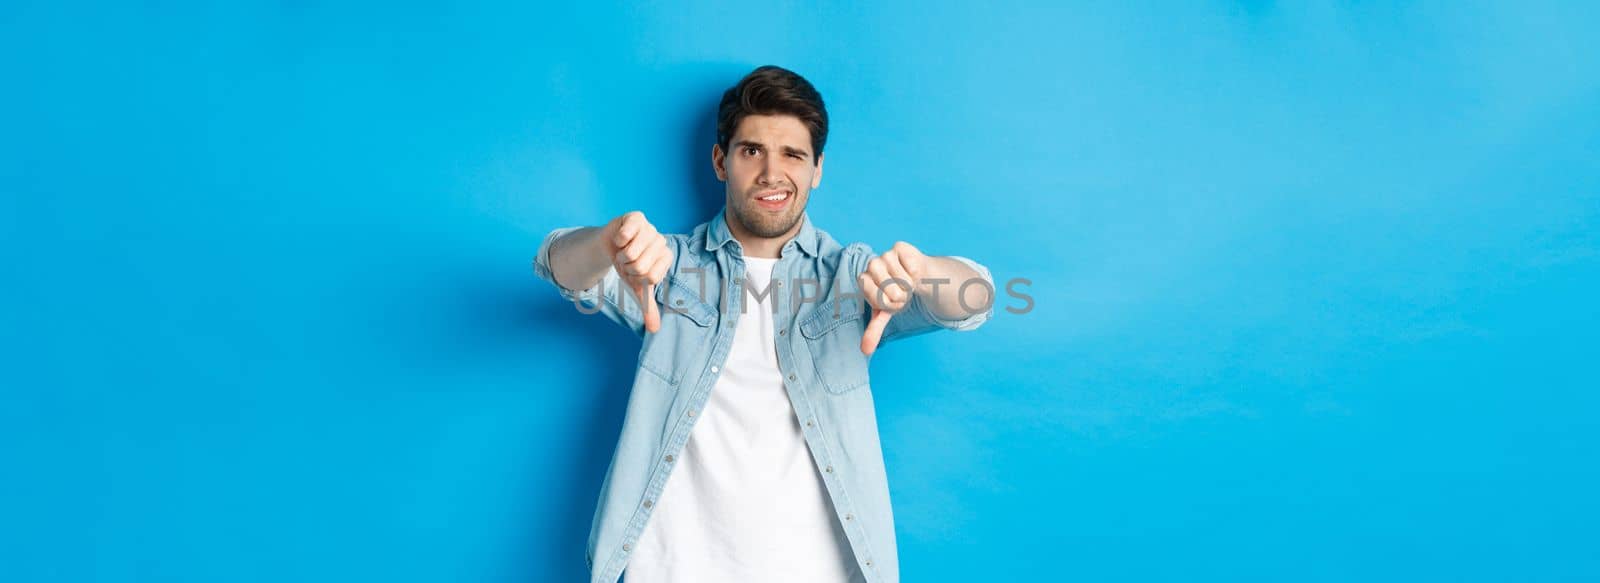 Disappointed man showing thumbs down and grimacing at something awful, dislike product, judging bad advertisement, standing against blue background.